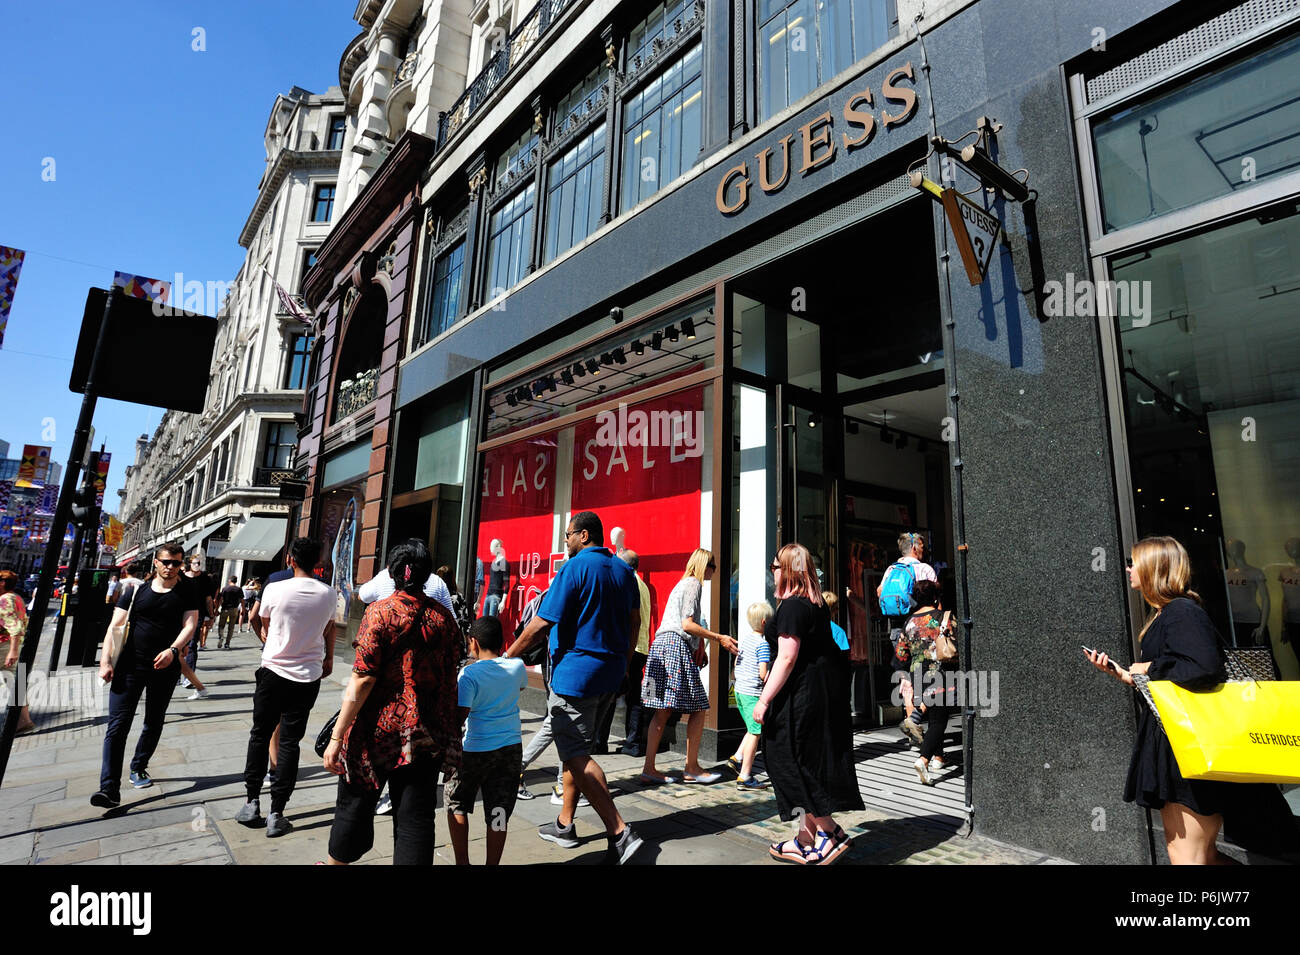 Guess Store High Resolution Stock Photography and Images -